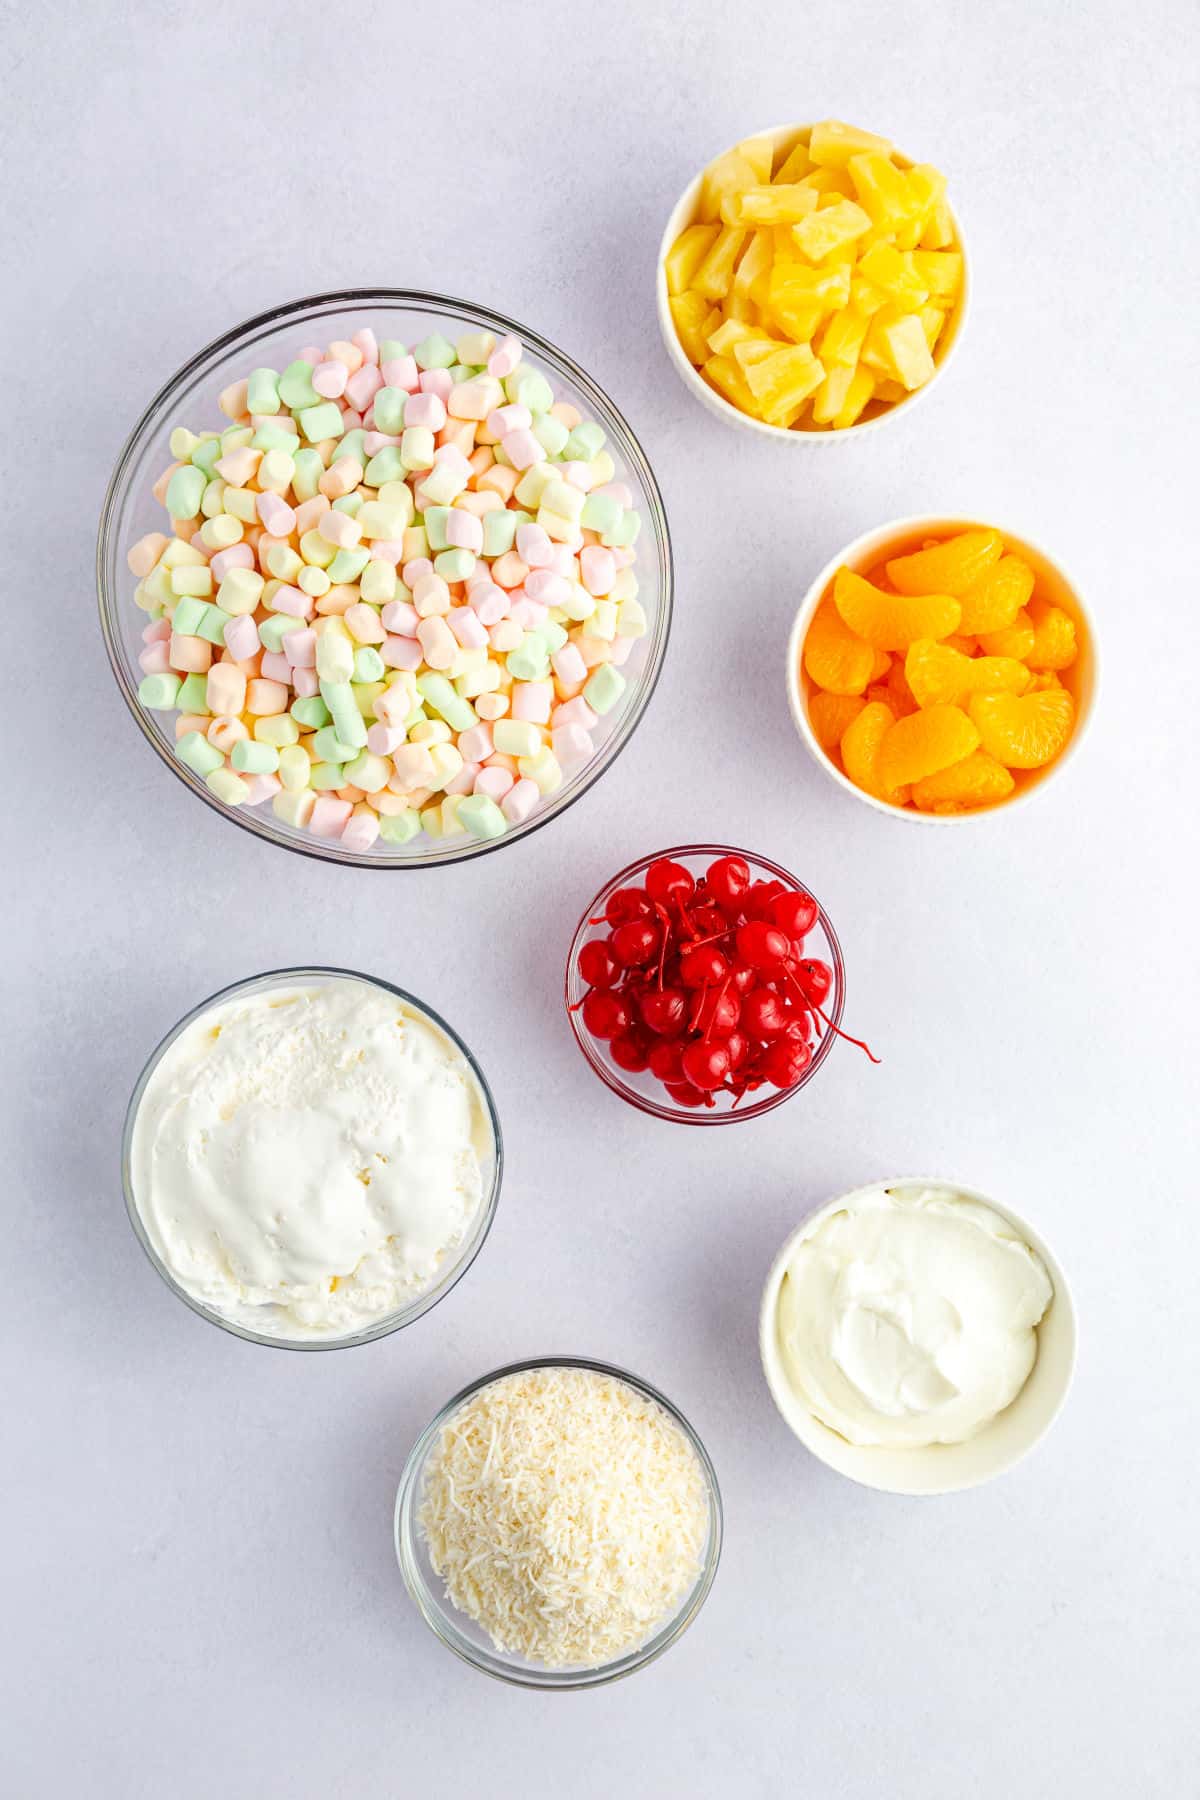 Ambrosia salad ingredients: sour cream, cool whip, marshmallows, oranges, pineapples, and cherries.